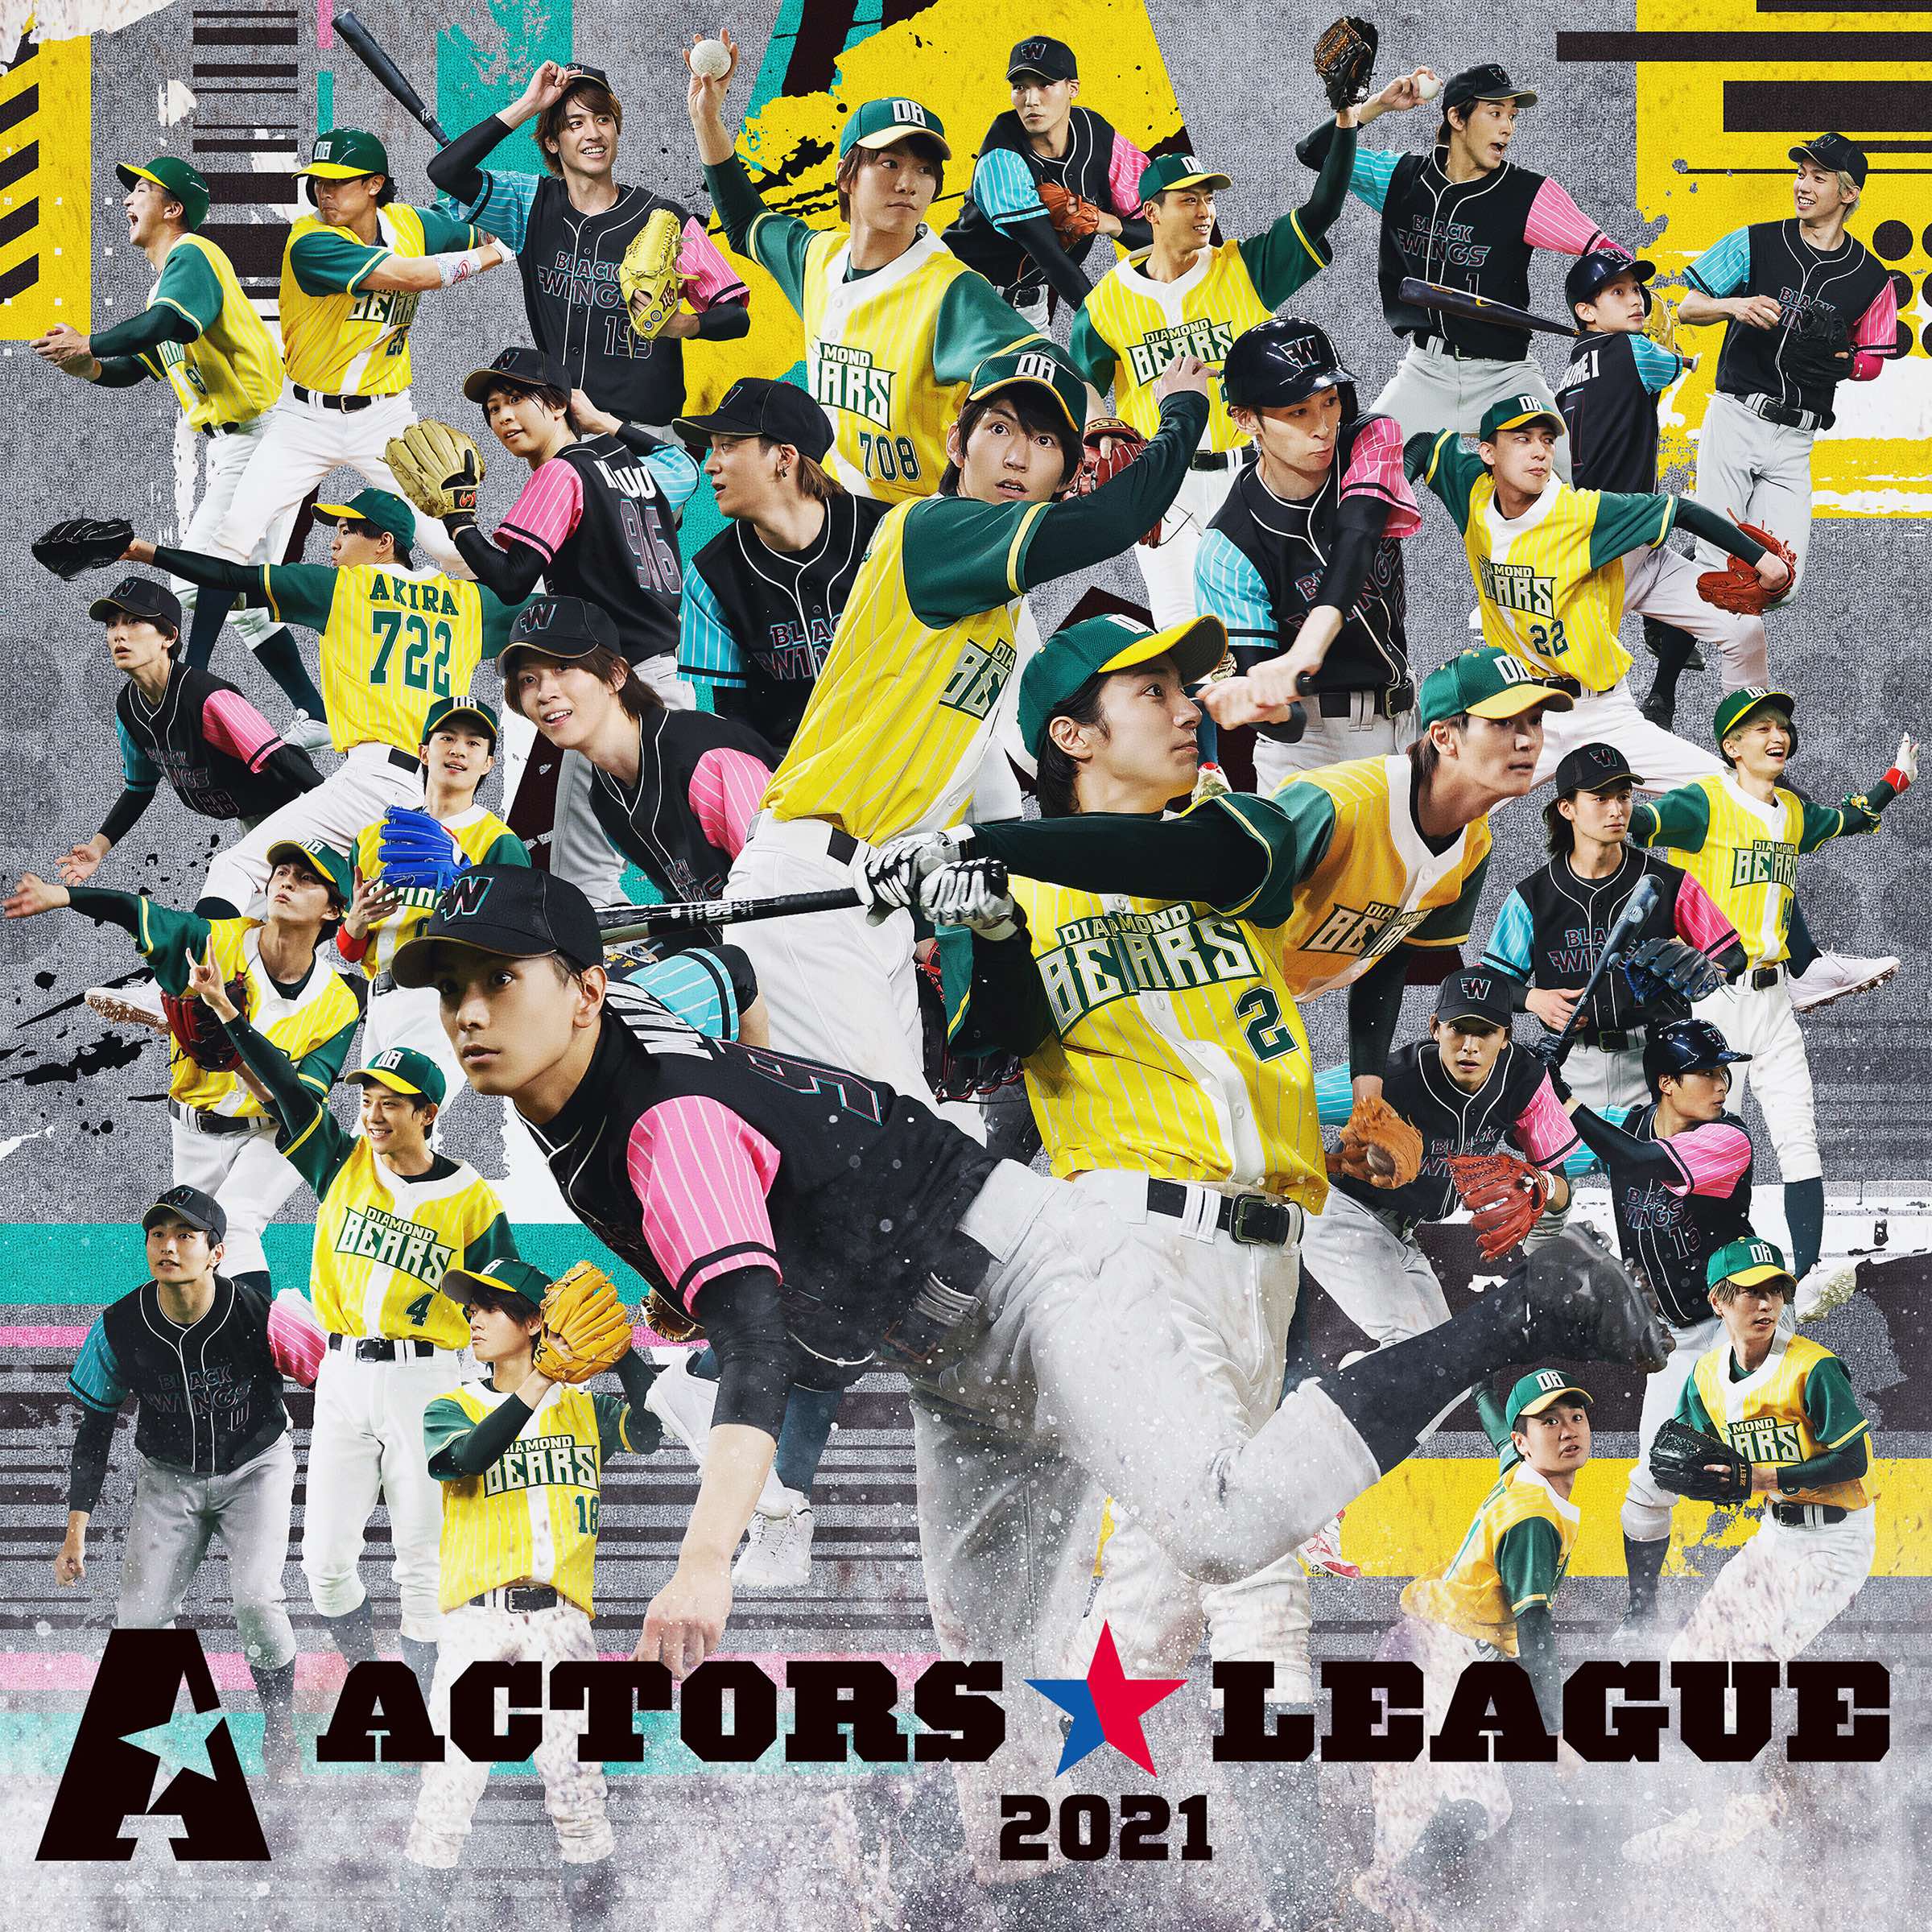 ACTORS☆LEAGUE 2021 (CD+Blu-ray) release on December 15th,2021